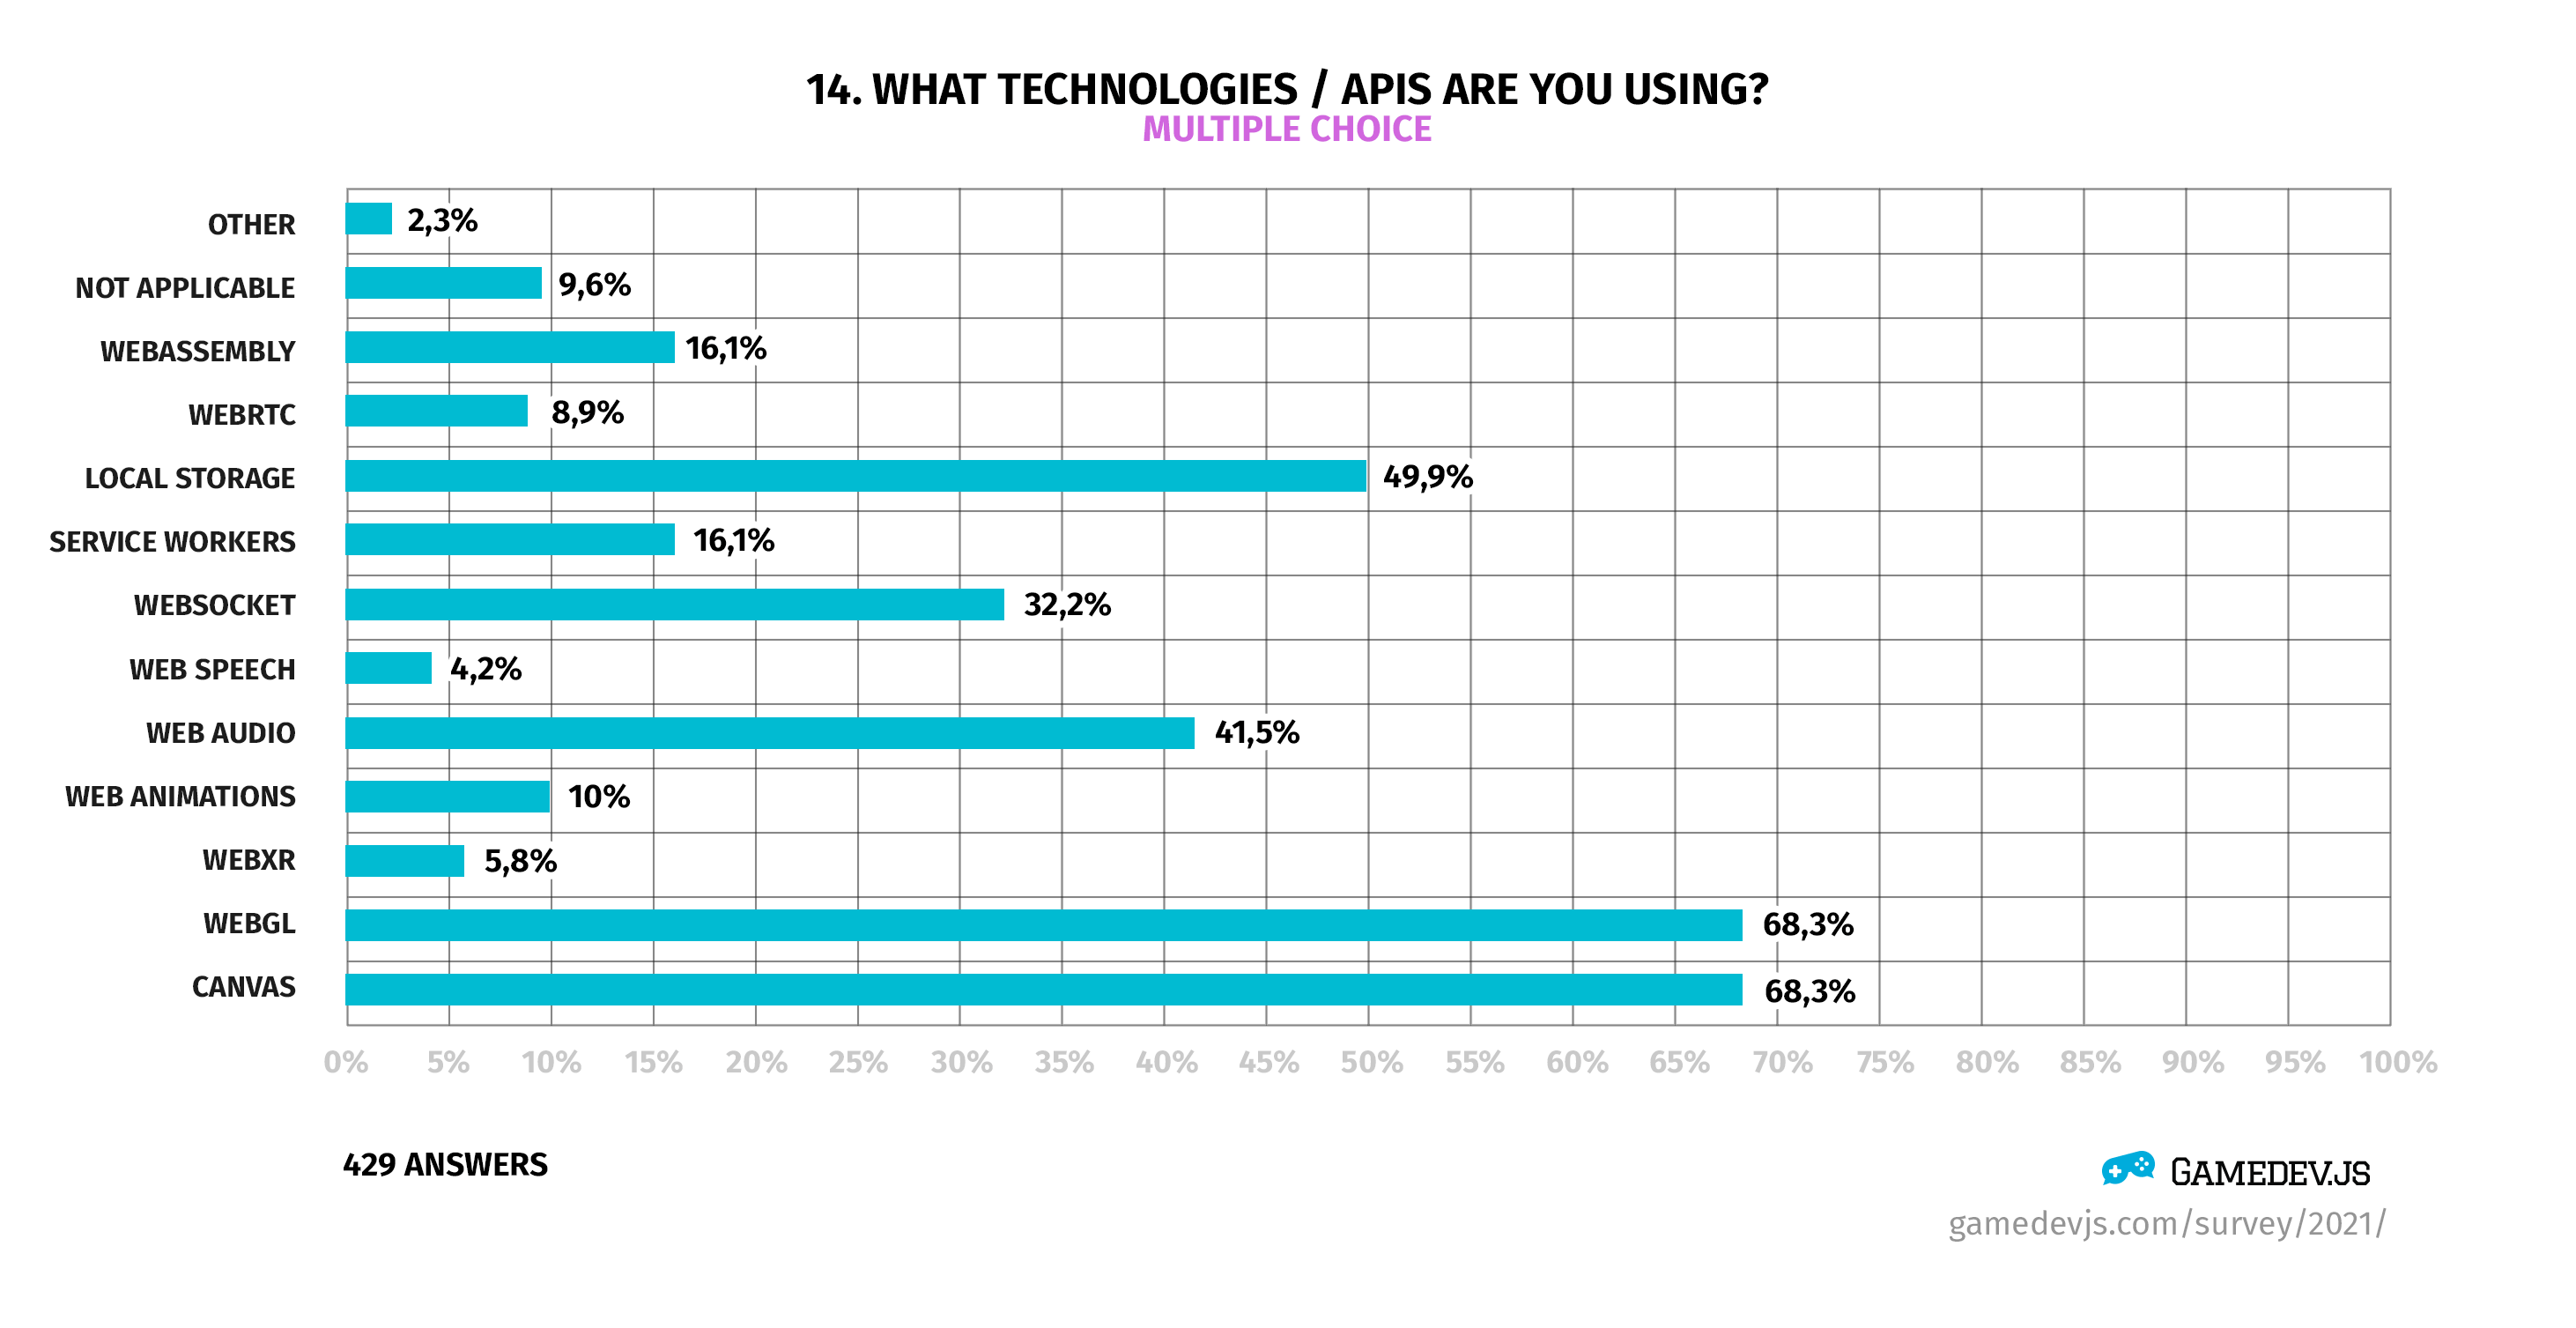 Gamedev.js Survey 2021 - Question #14: What technologies / APIs are you using?